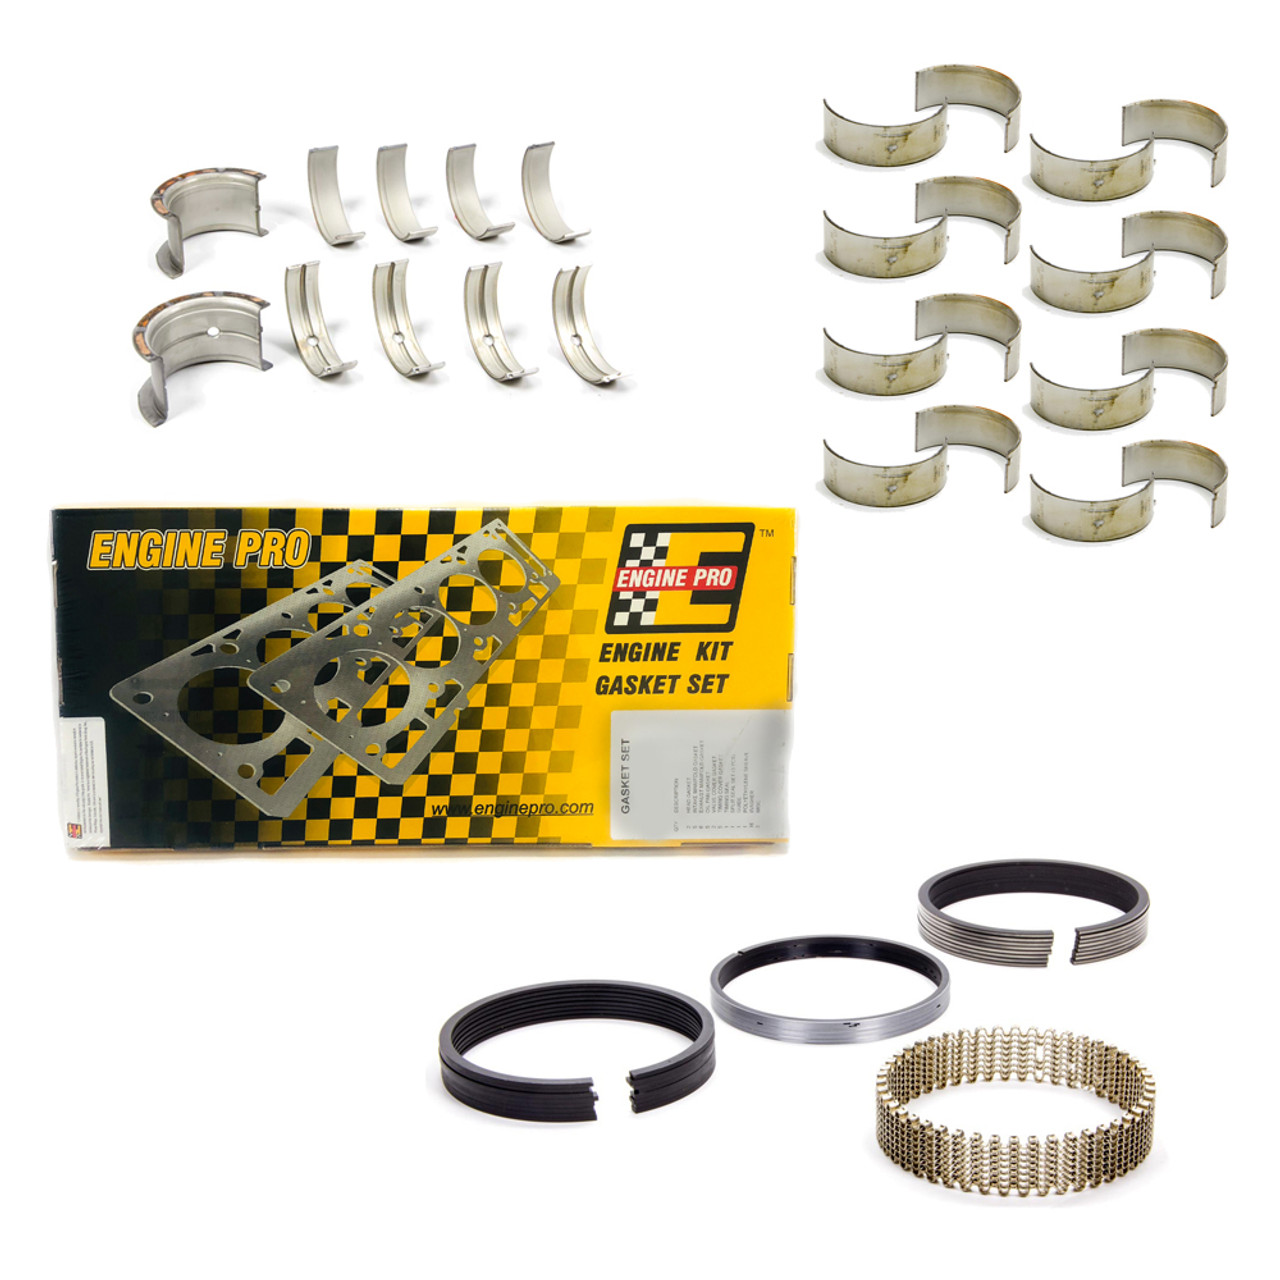 Re-Ring Engine Kit compatible with SBC Chevy 400 1970-1980 Gaskets+Bearings+Rings std 